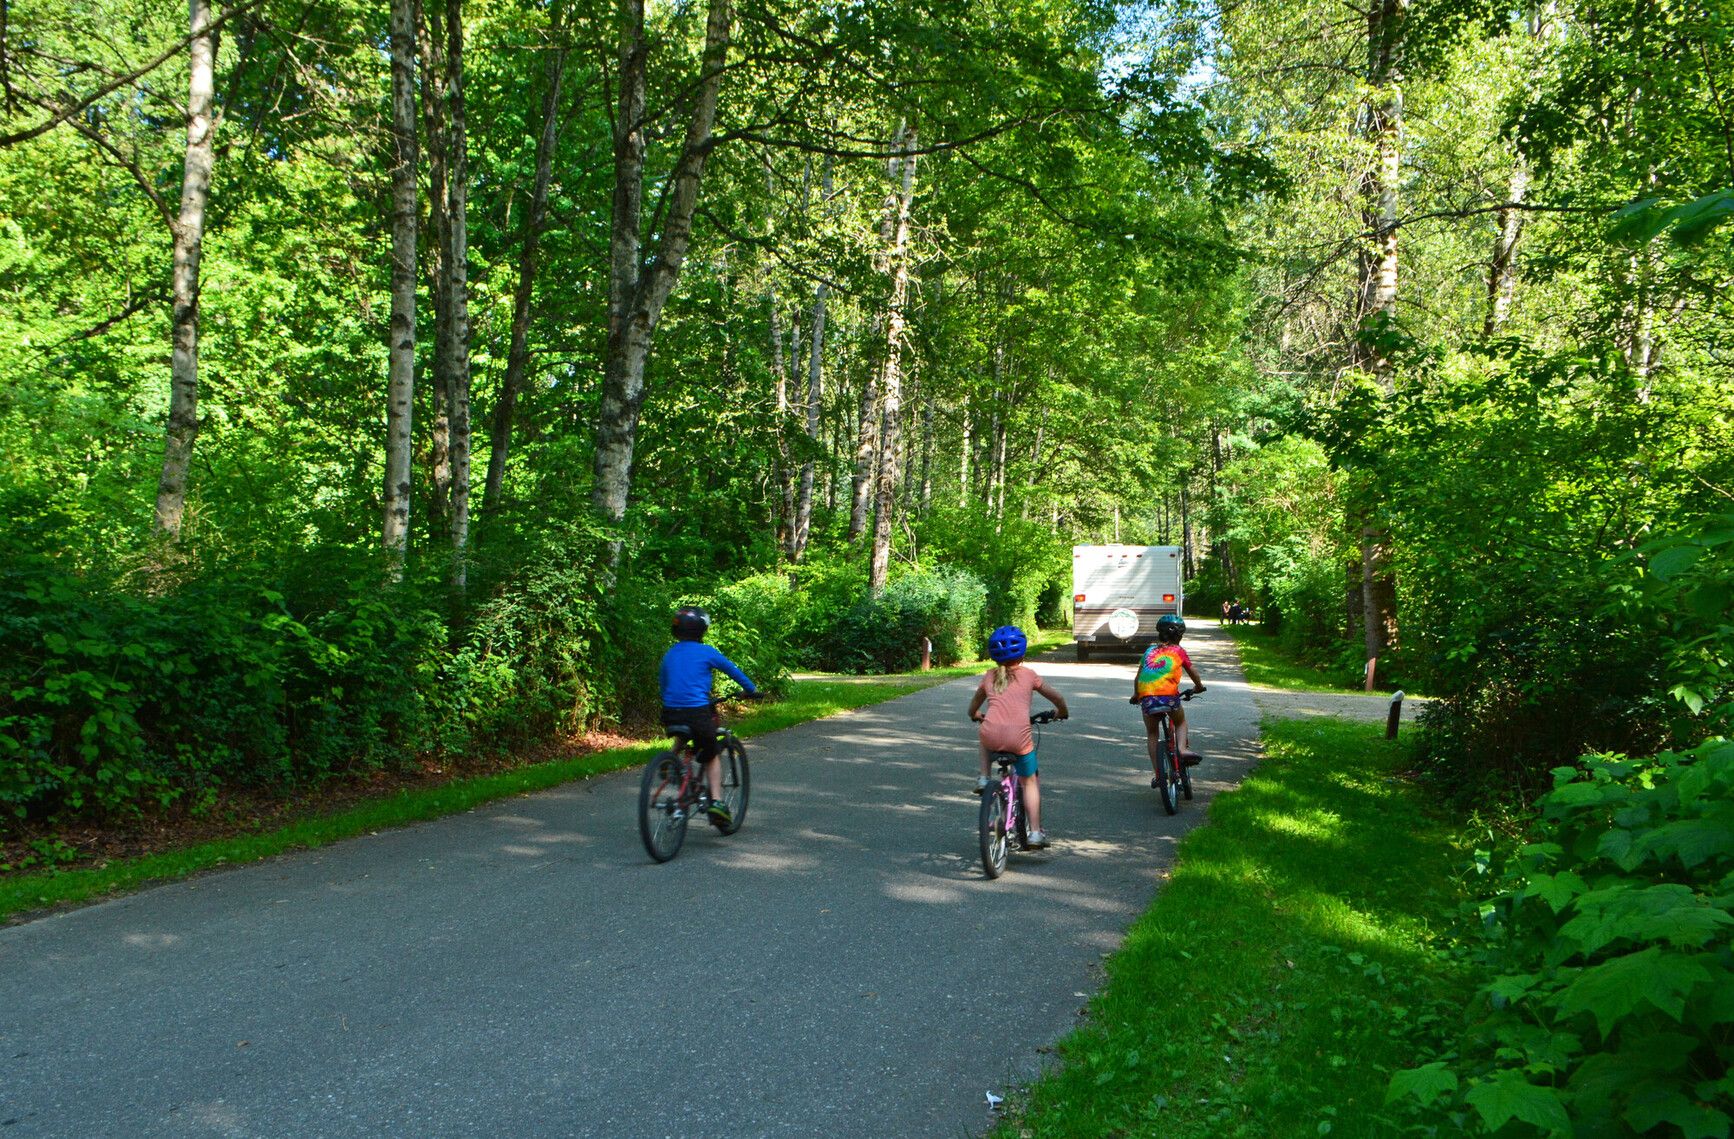 Young adventurers pedalling through Kokanee Creek Park's campsite roads, savouring the freedom of exploration.